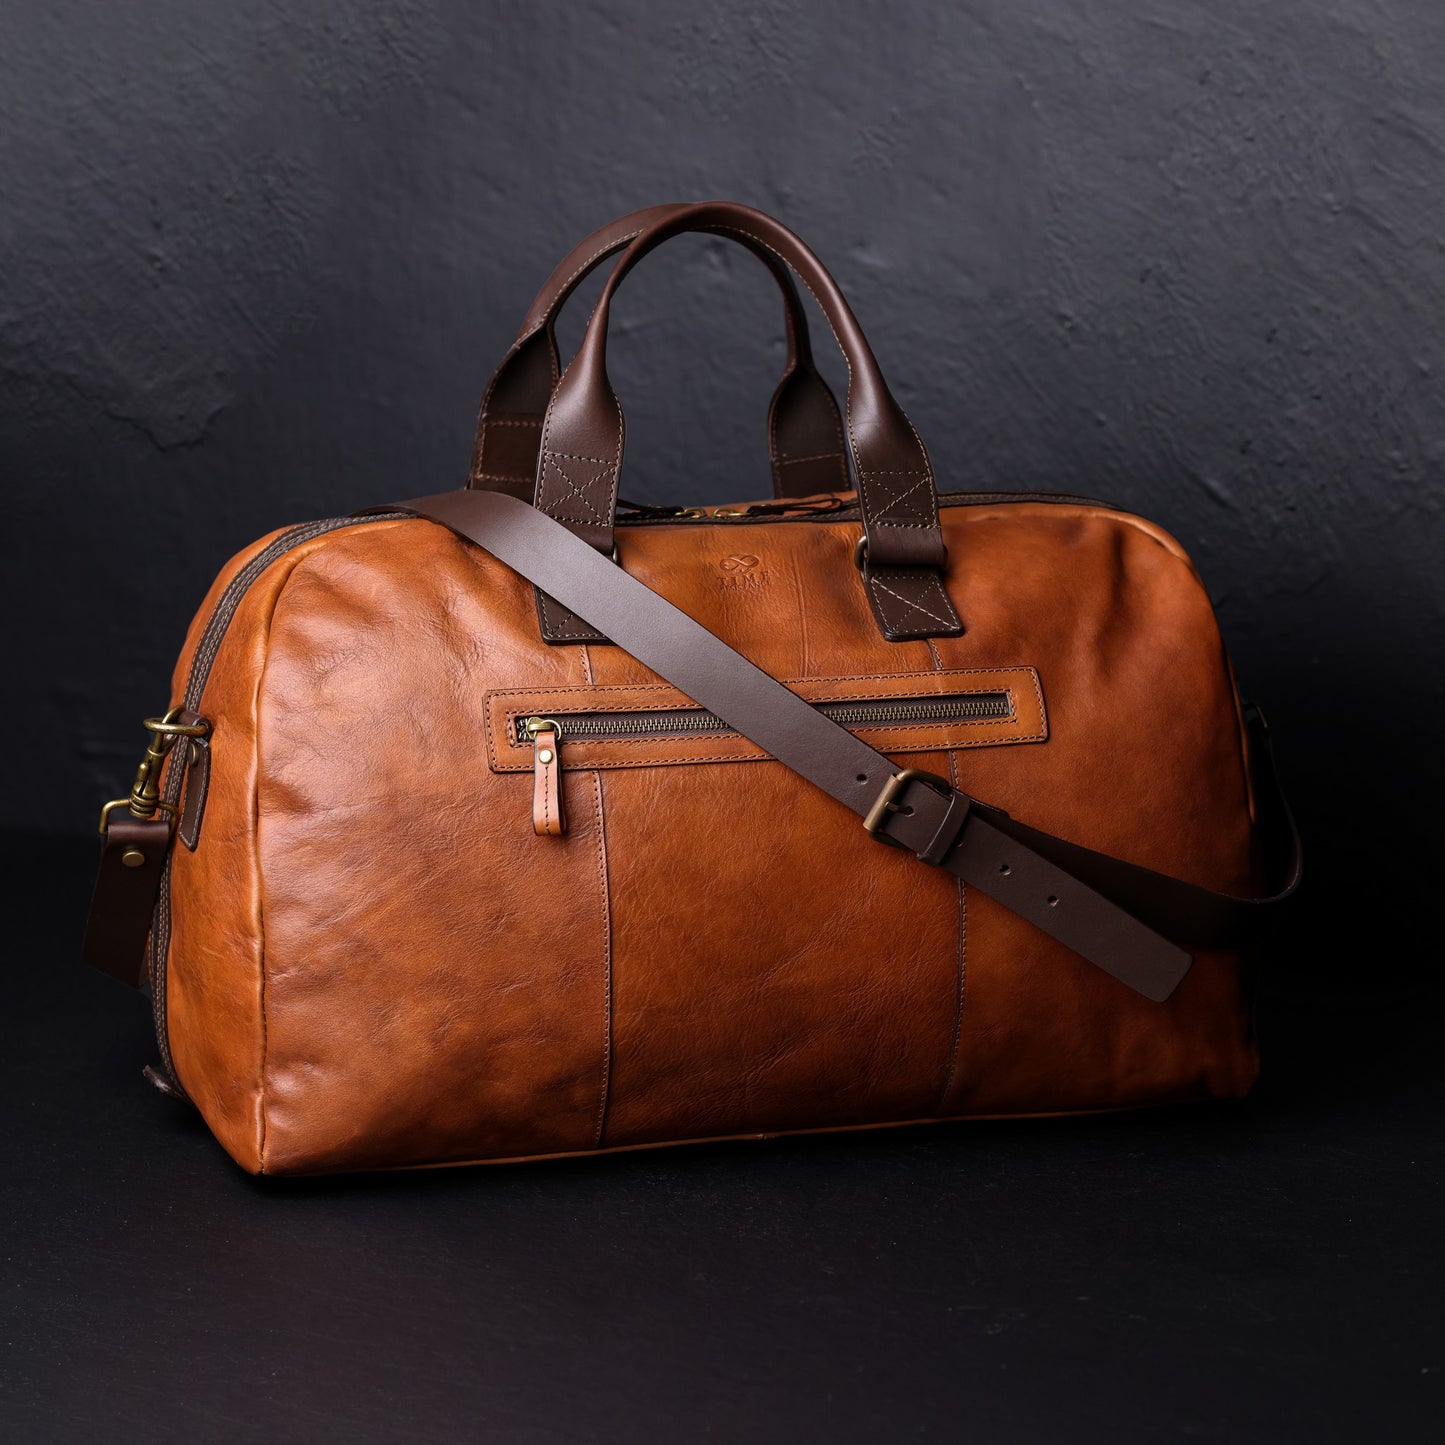 Leather Duffel Bag - The Day of The Locust